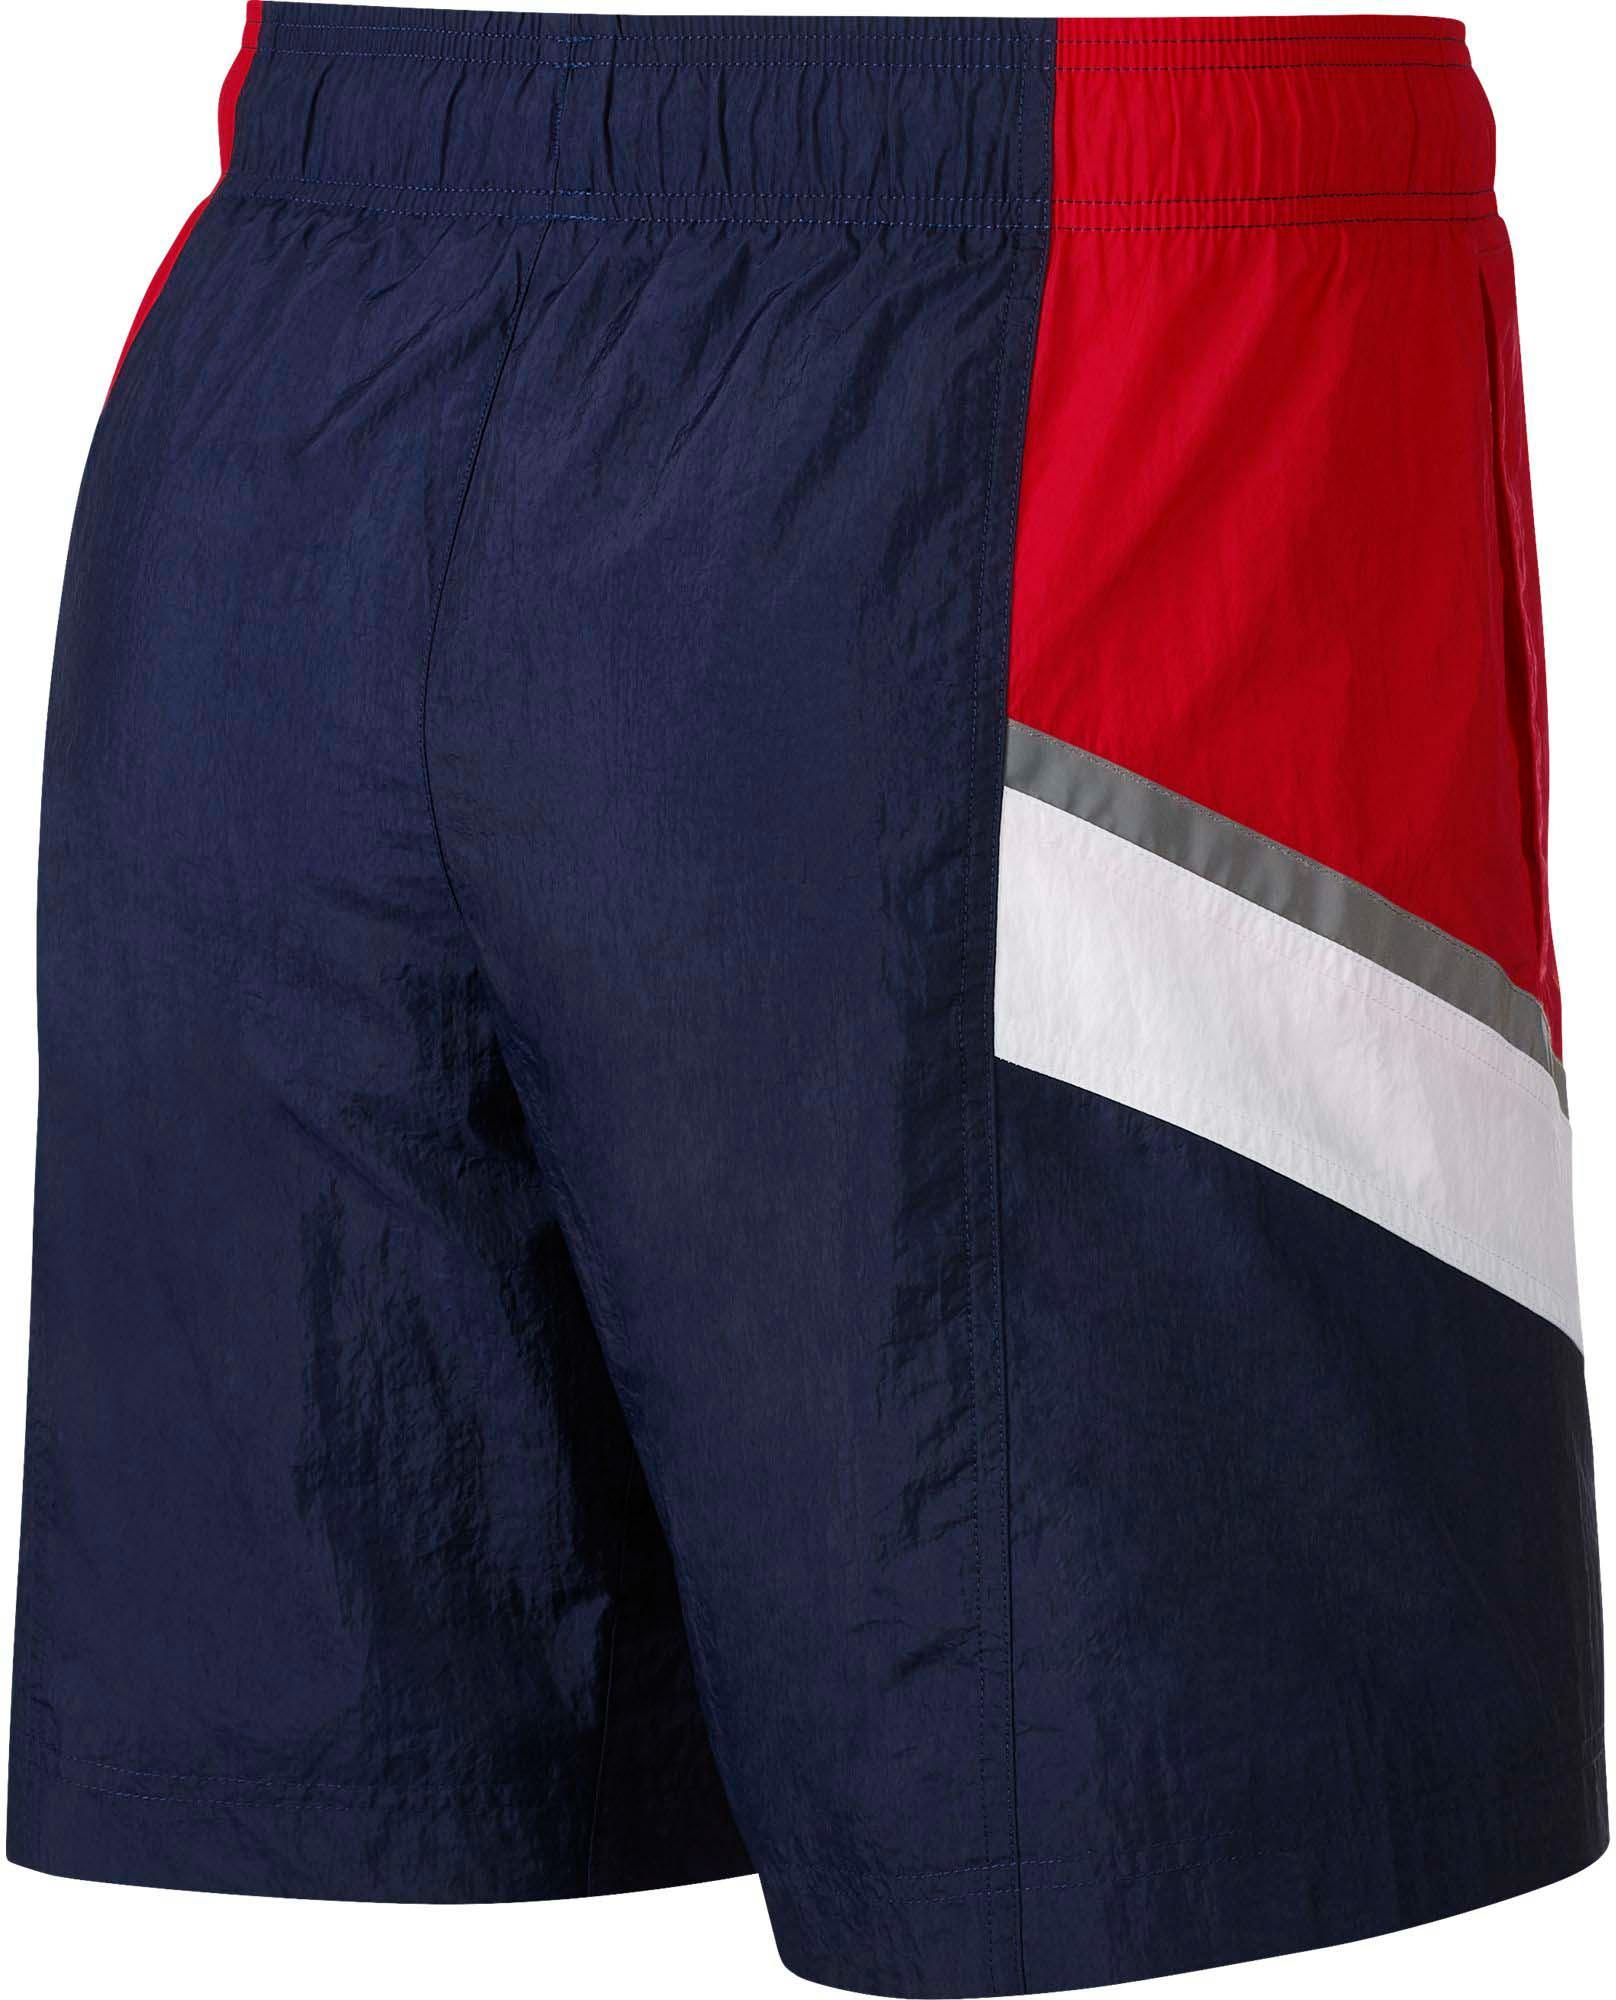 nike red white and blue shorts